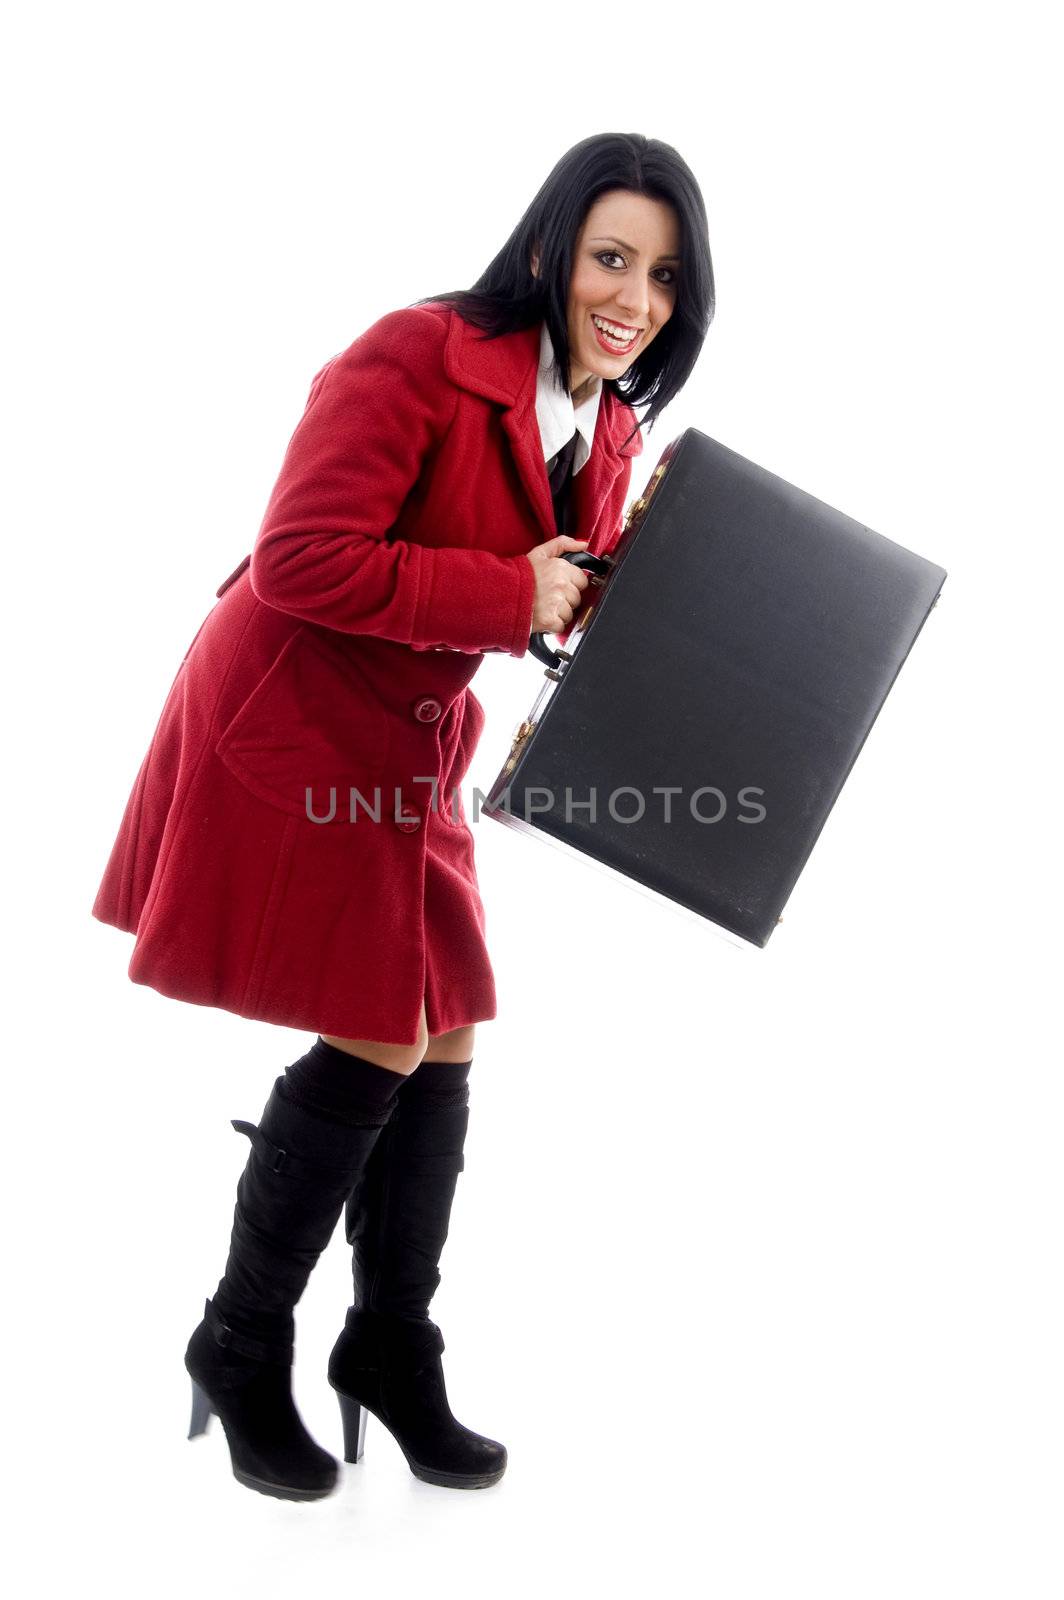 full body pose of young woman holding office bag by imagerymajestic